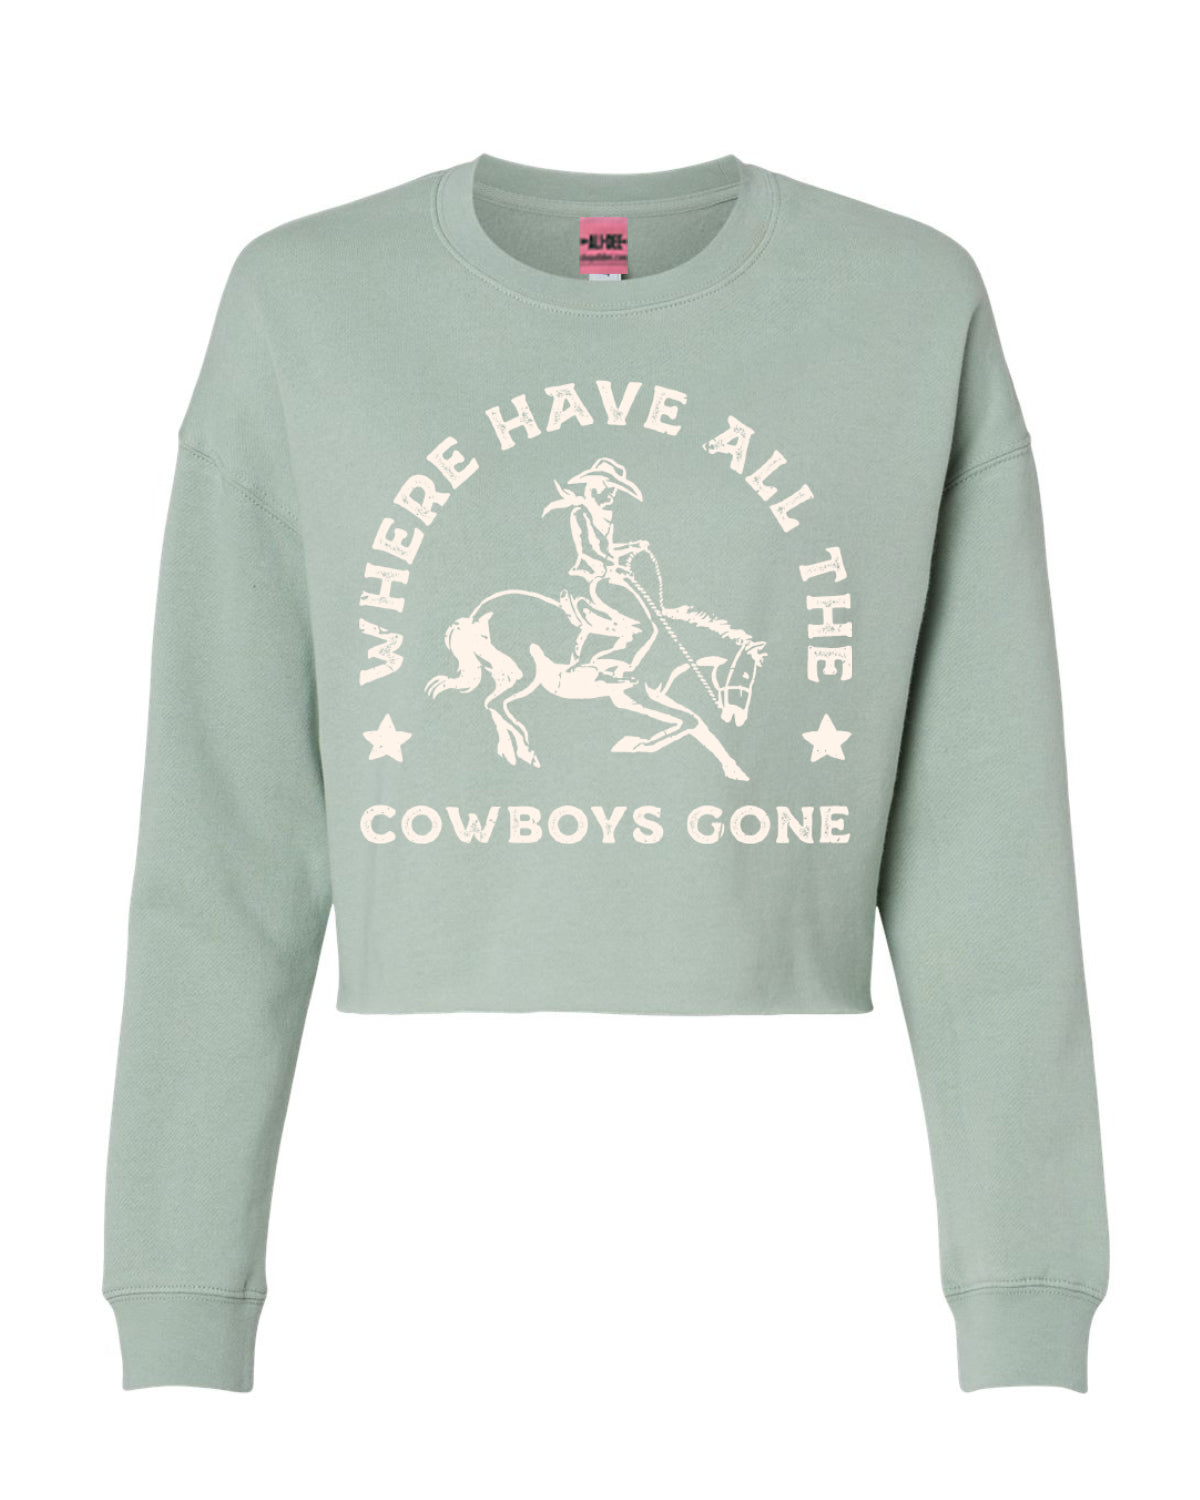 Where Have All The Cowboys Gone Crop Sweatshirt - Sage